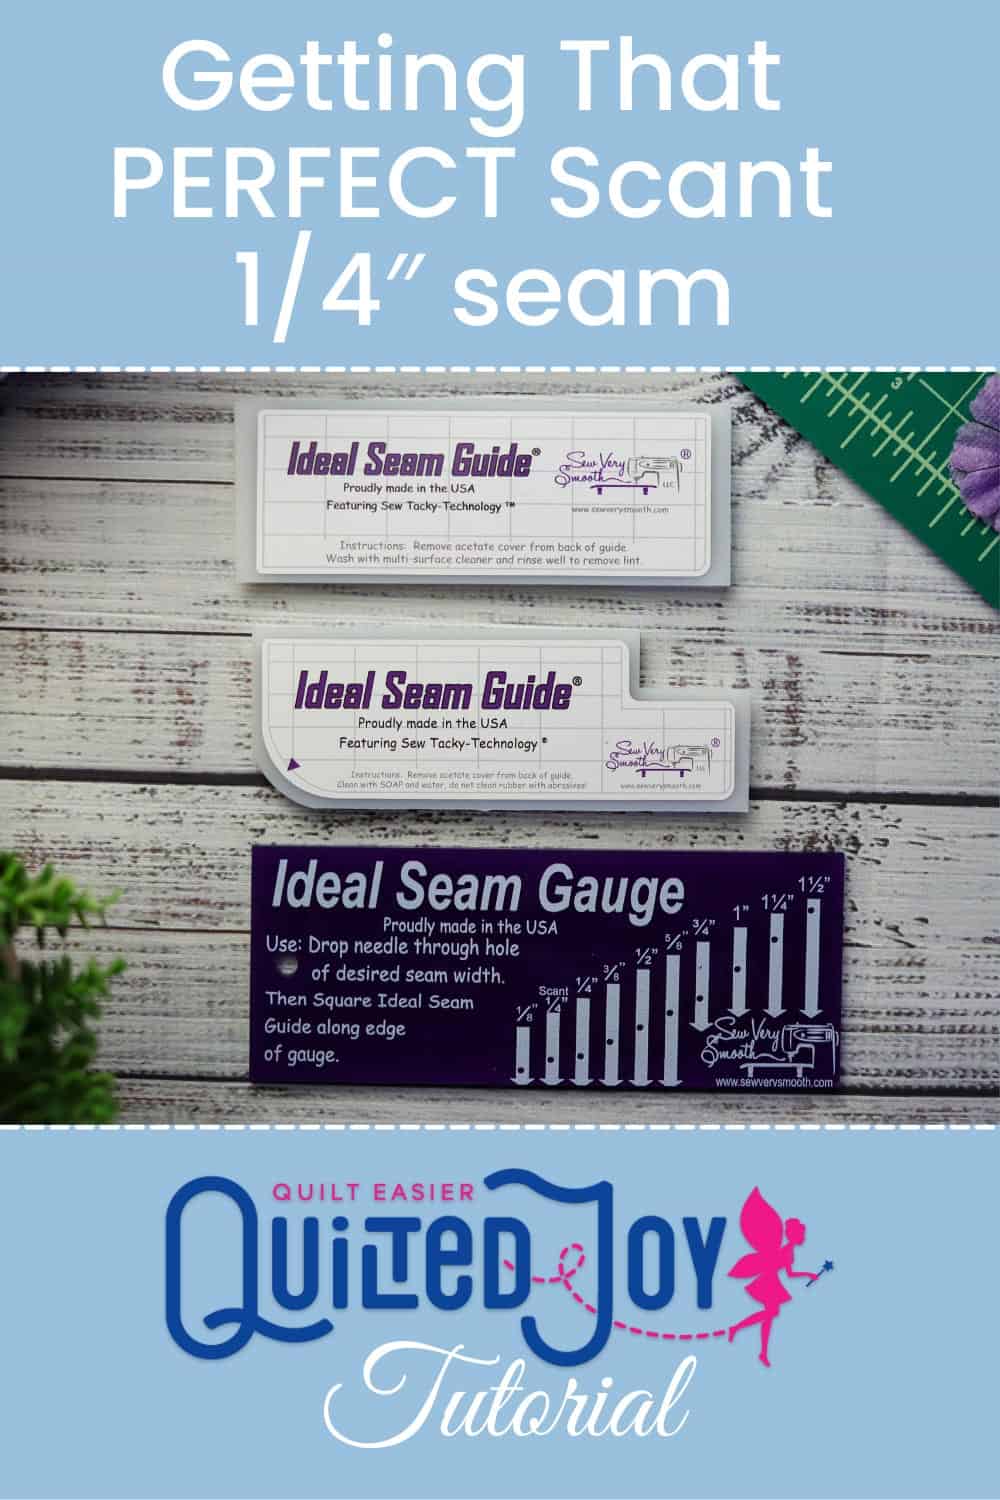 Image of Ideal Seam Guide and Gauge with text Getting that Perfect Scant 1/4 inch Seam